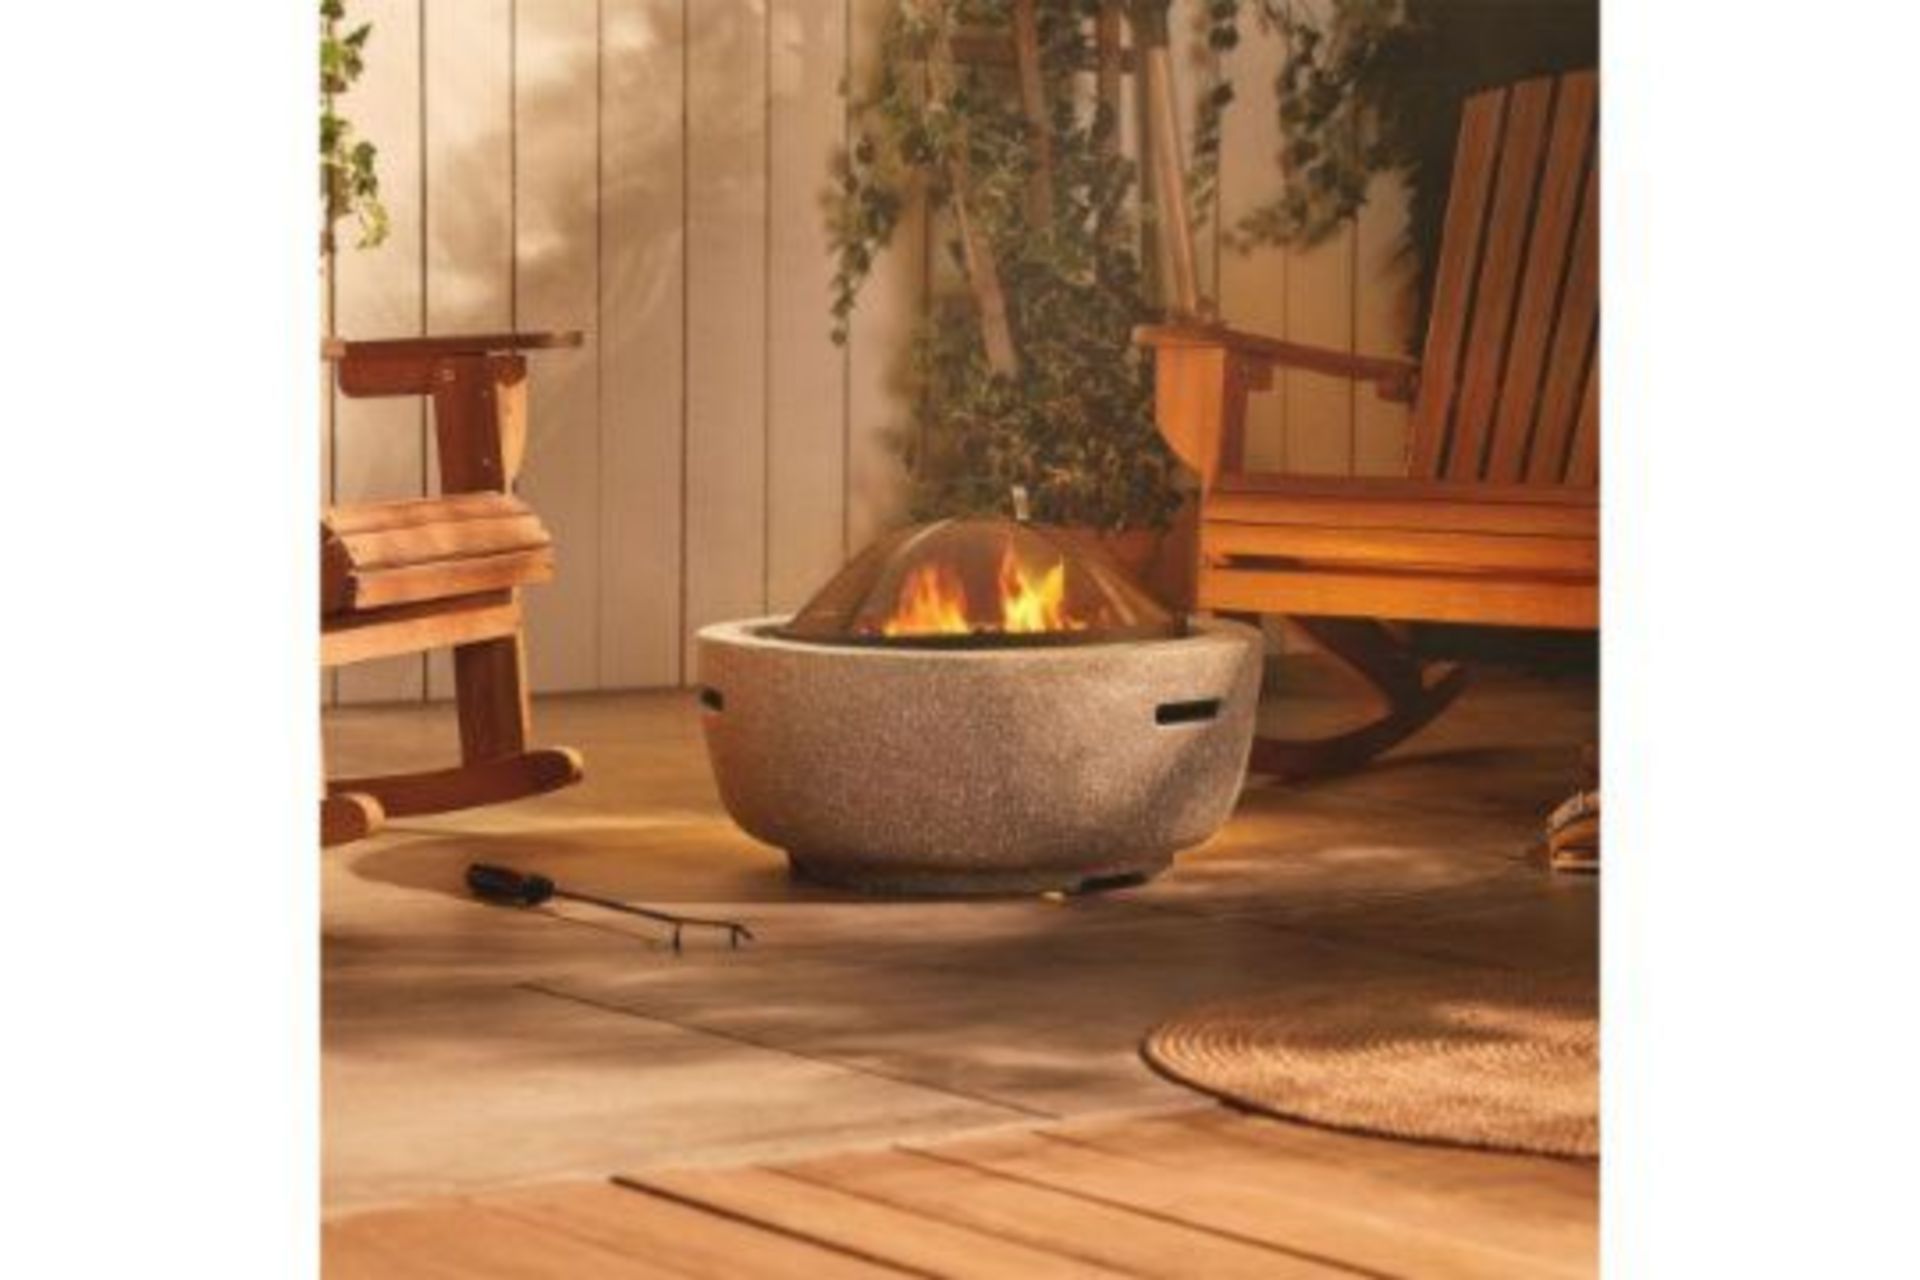 New Boxed Round MgO Fire Pit. RRP £229.99. (REF702) Don’t let the onset of evening curtail your